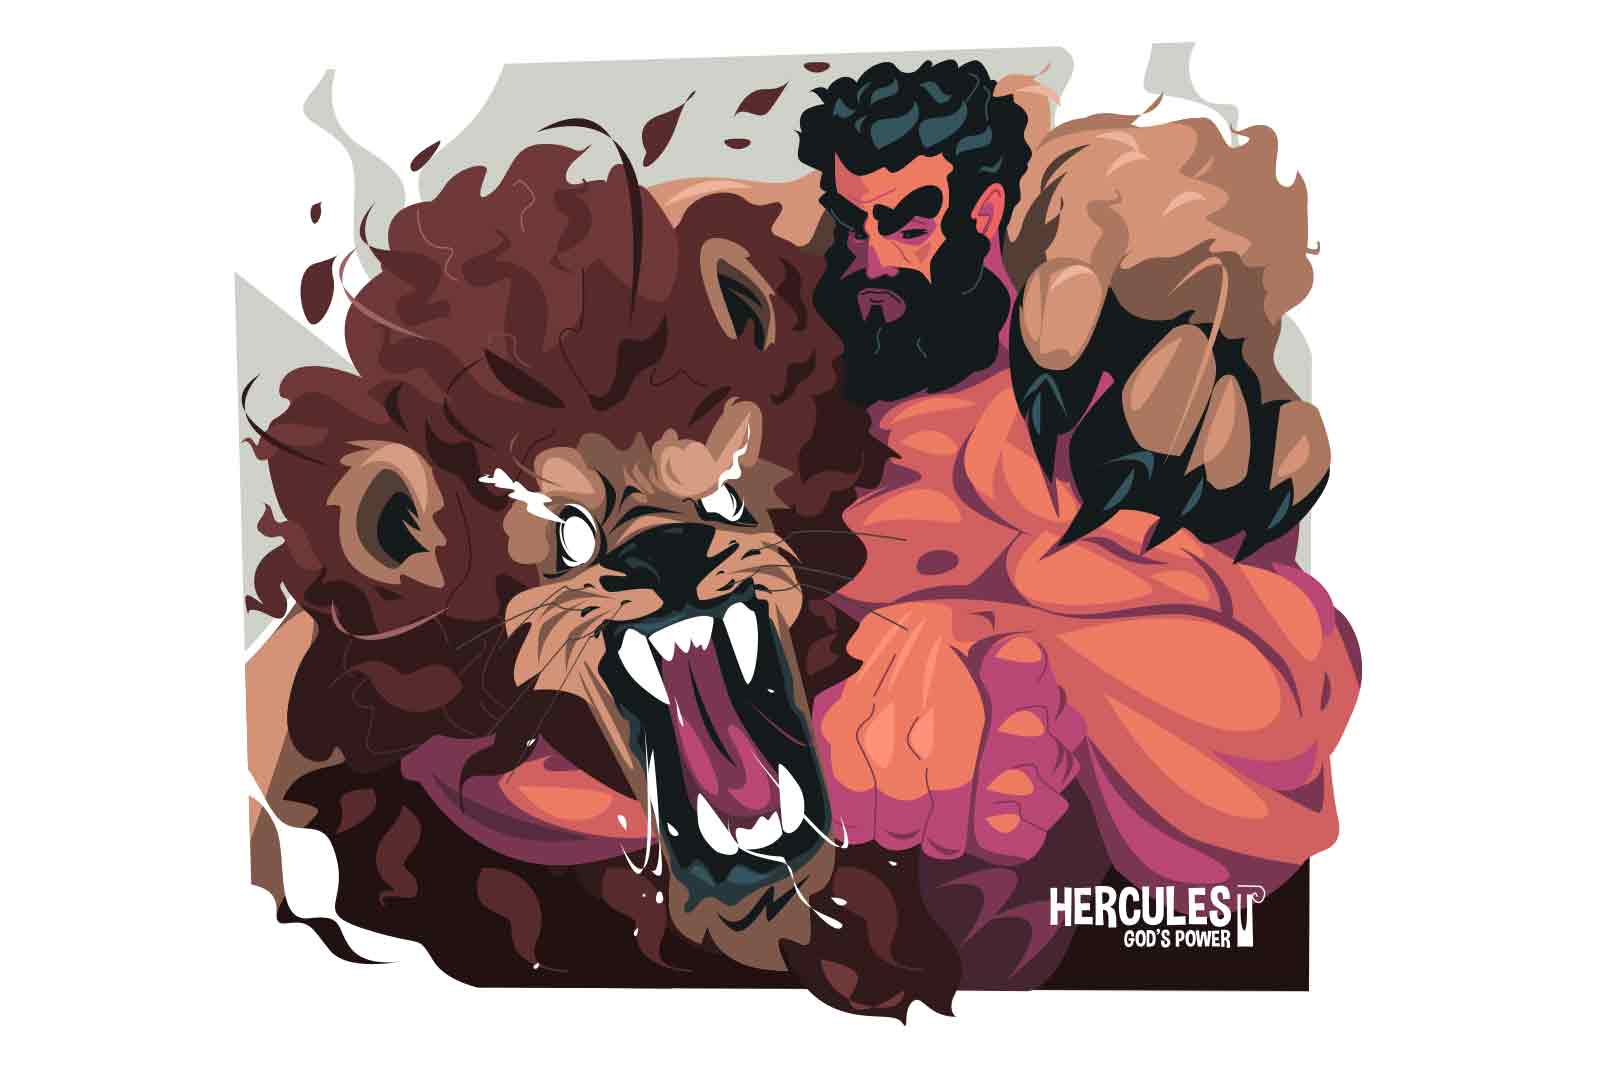 Hercules fights with lion character vector illustration. Intense fight scene, Hercules squeeze neck of rageous lion.